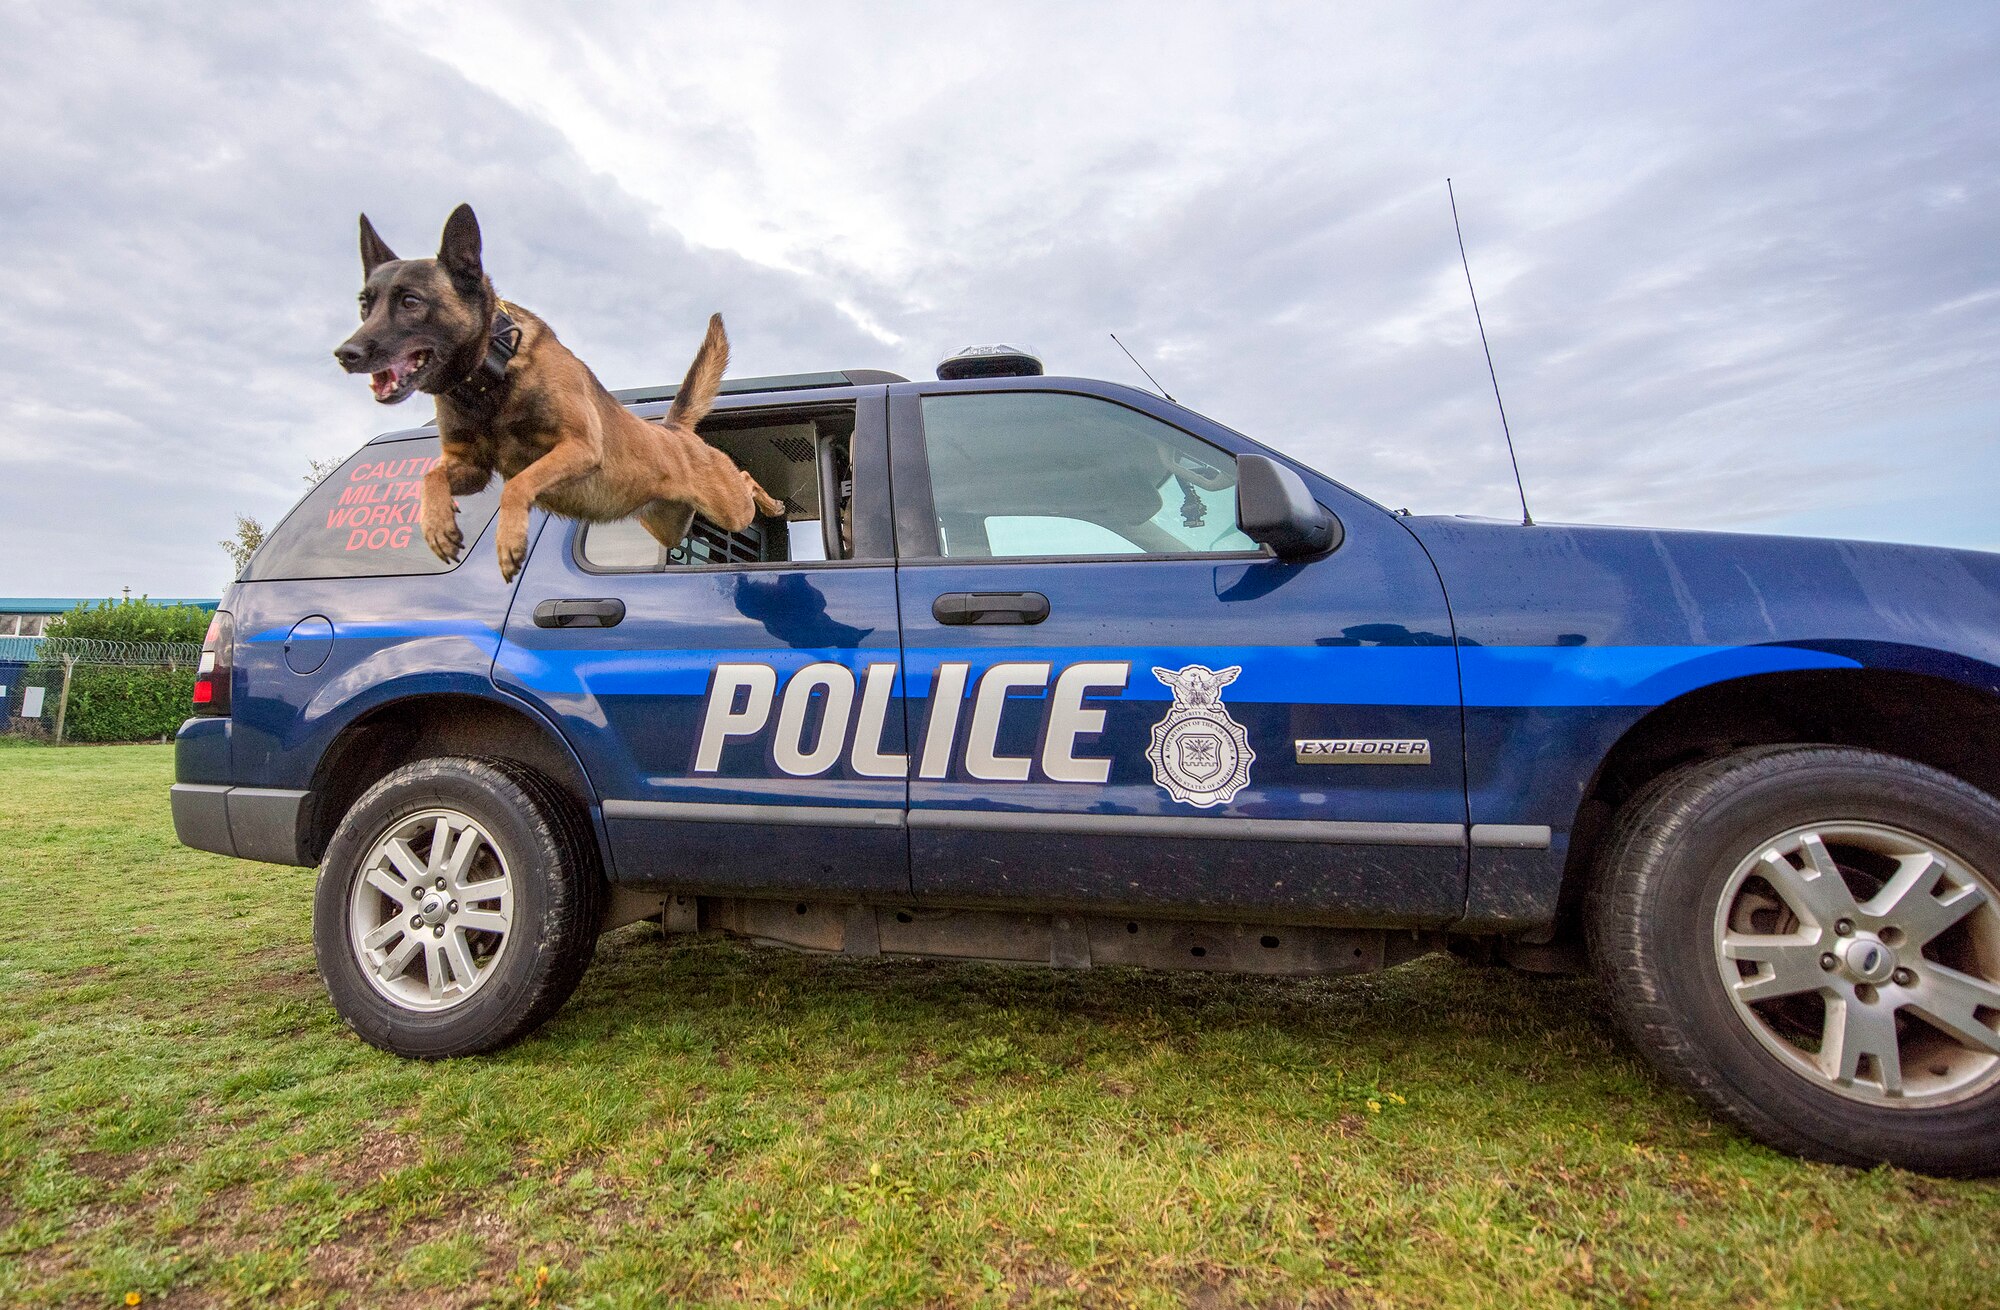 Military working dog Ukkie jumps out a patrol car as part of MWD daily training at RAF Mildenhall, England, Nov. 6, 2018. The MWD teams train the “six-phases of aggression” on a daily basis, which consists of field interview, pursuit of attach, search, escort and a standoff. (U.S. Air Force photo by Staff Sgt. Christine Groening)